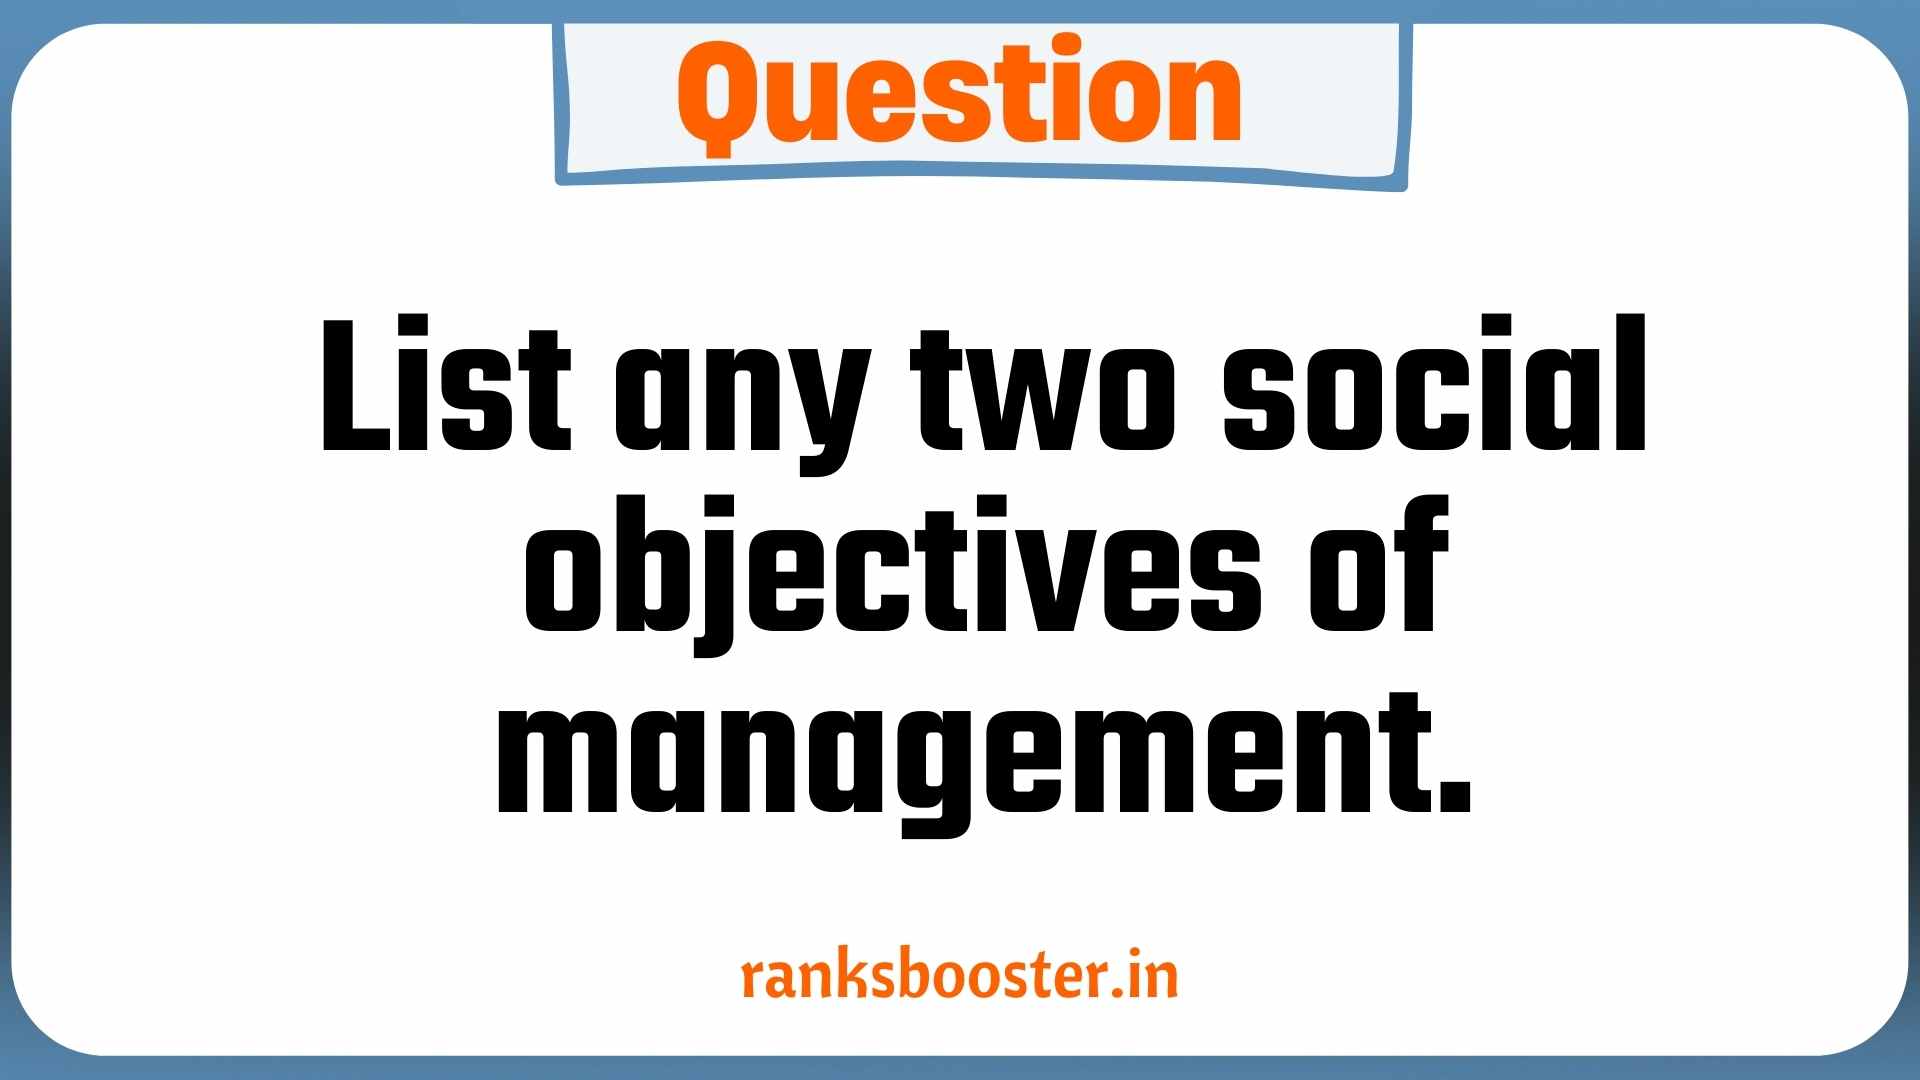 Question: List any two social objectives of management. [CBSE 2010]